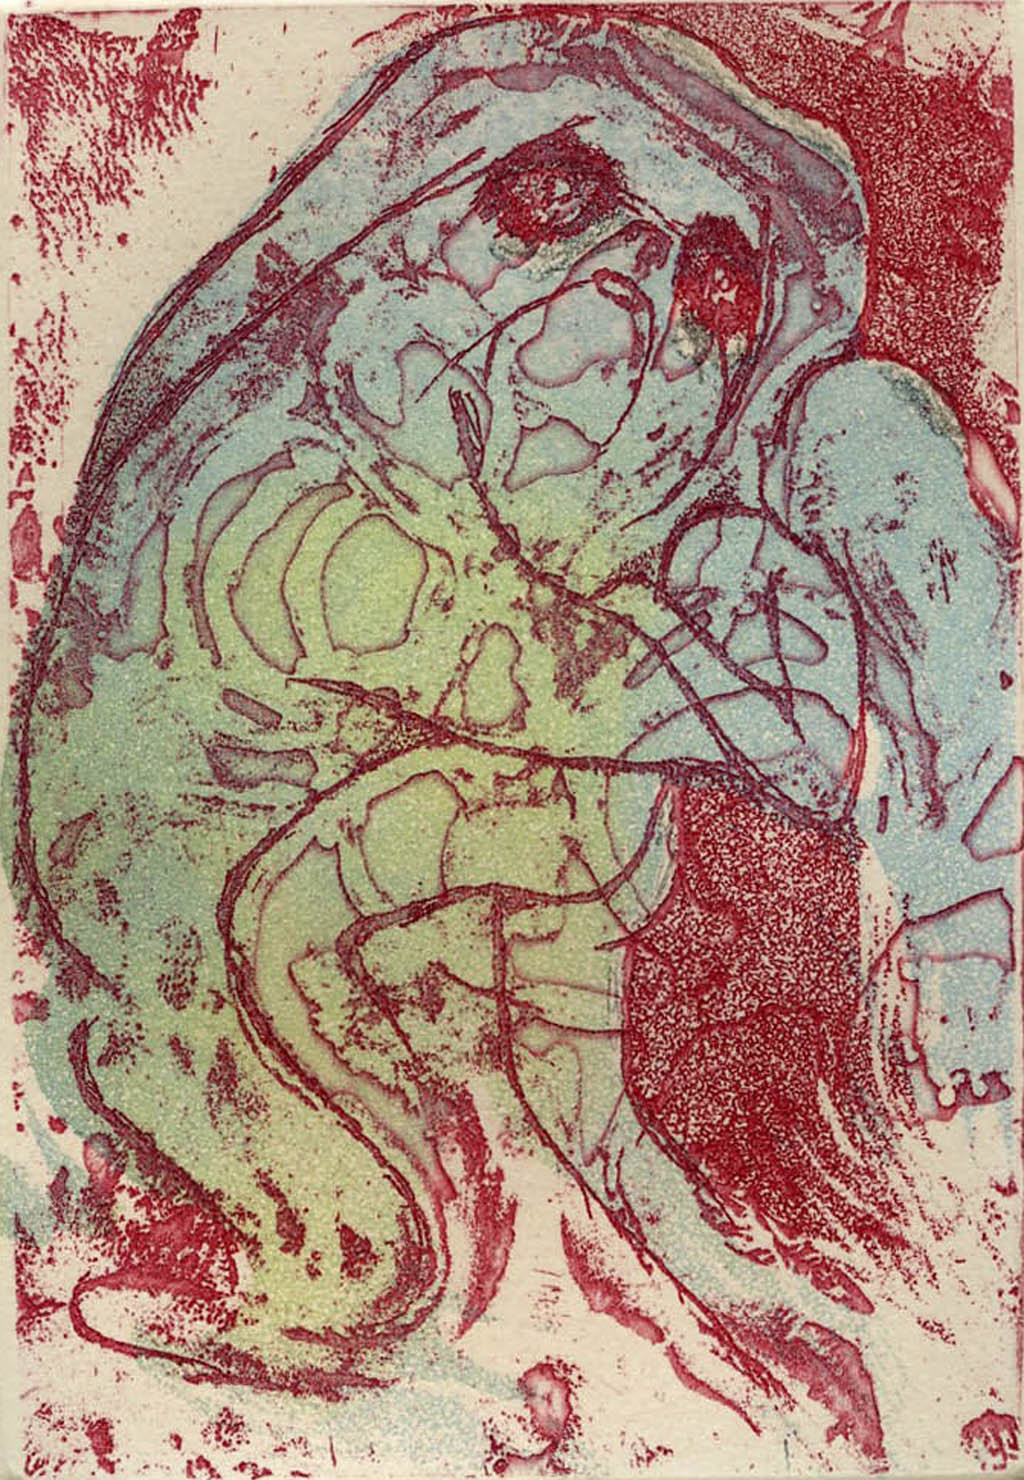 Dorothea Tanning - Red Drama - 1954 color etching